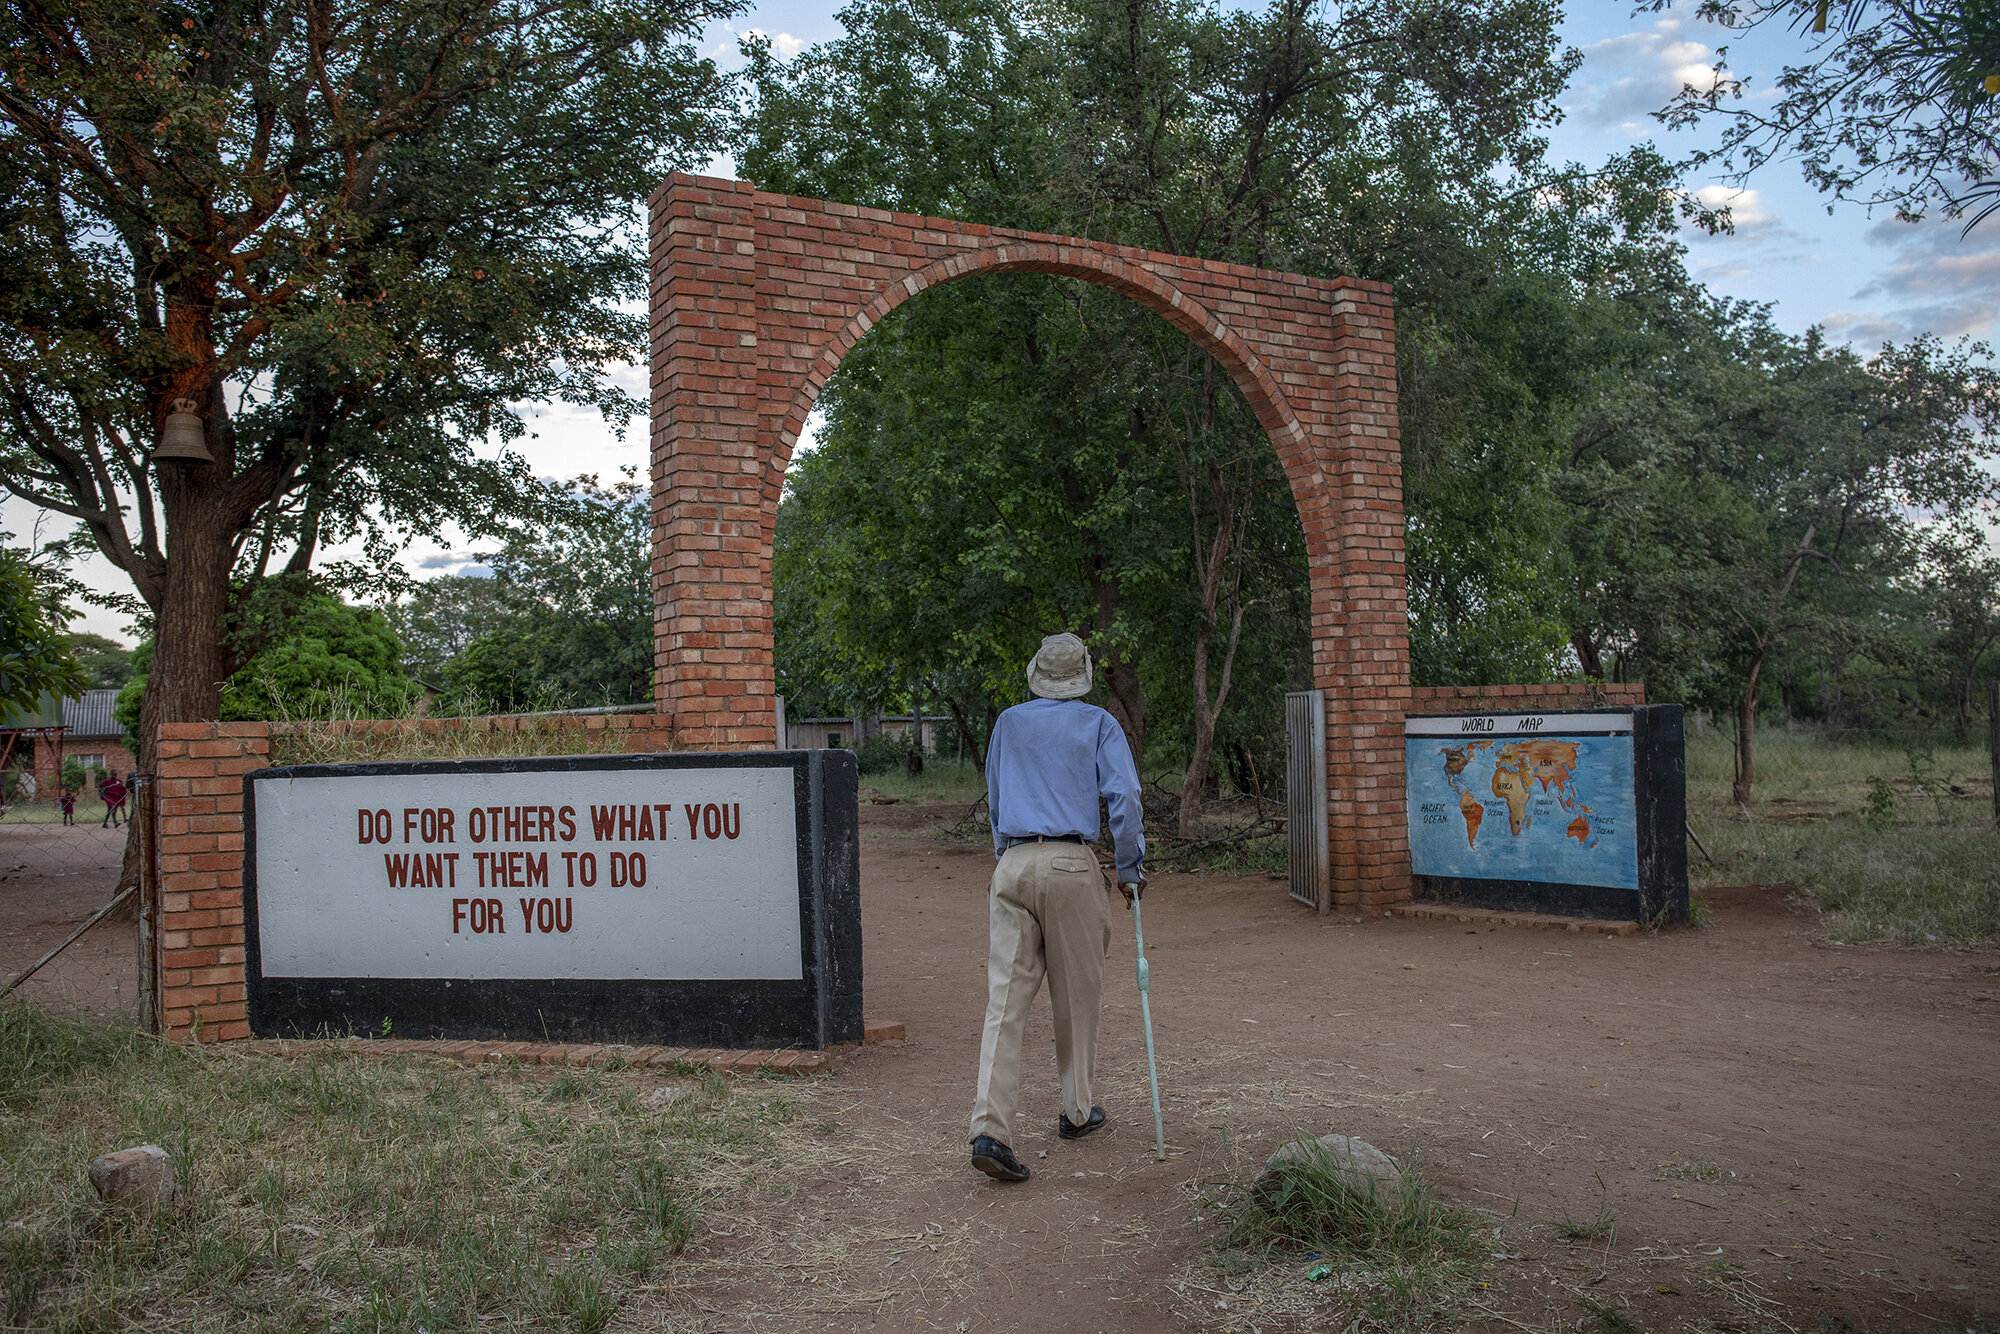  Every morning William Phiri walks to a nearby catholic church in his community in Dete, Zimbabwe to attend mass. He believes God protects us all in our daily lives.  